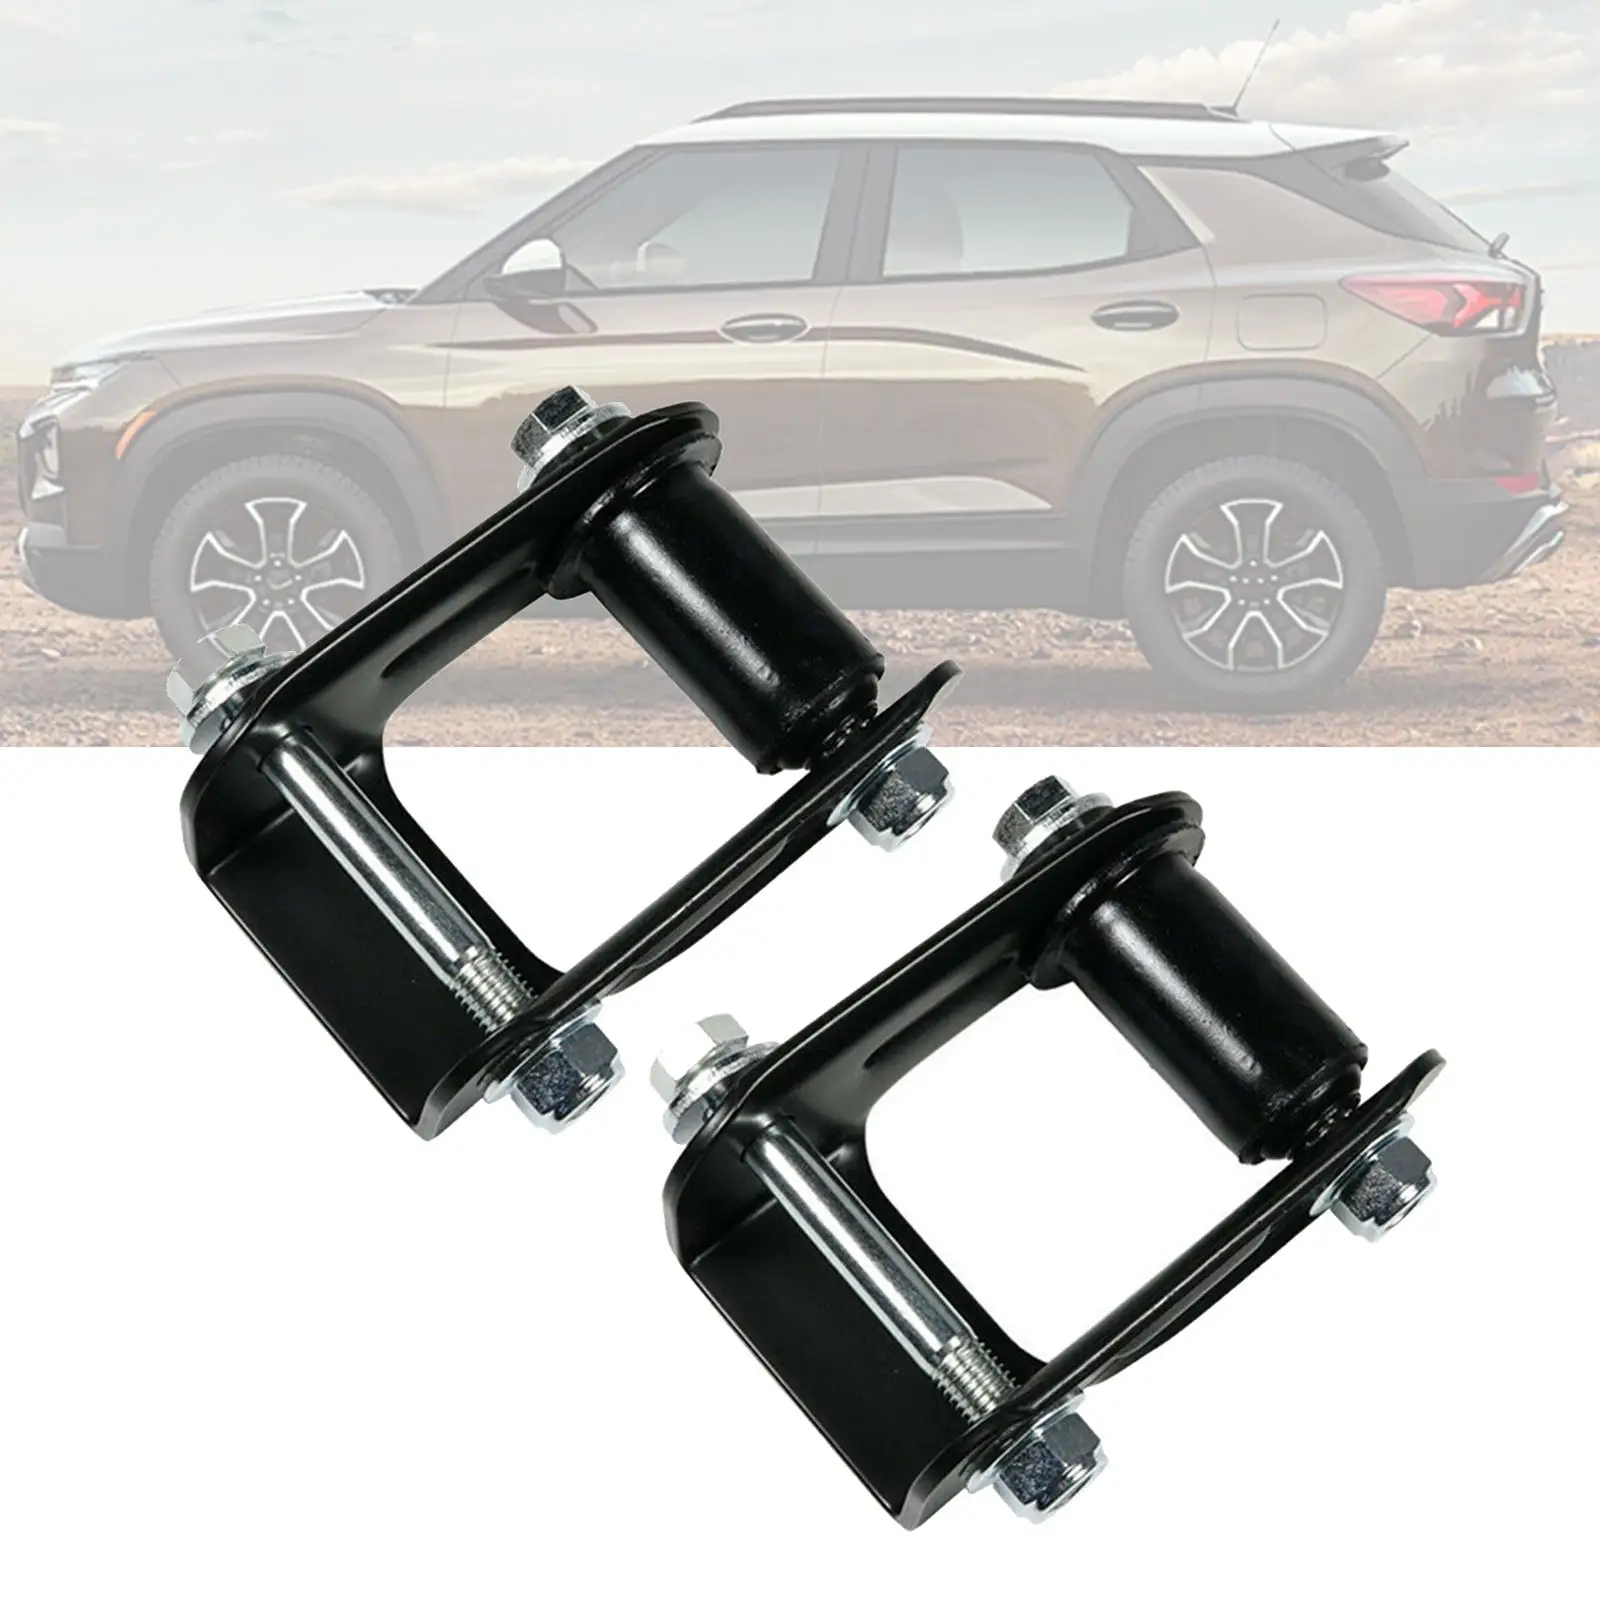 2 Pieces Leaf Spring Shackle Kit Professional Water Resistant Glossy Appearance Replaces for Chevrolet Blazer S10 Pickup